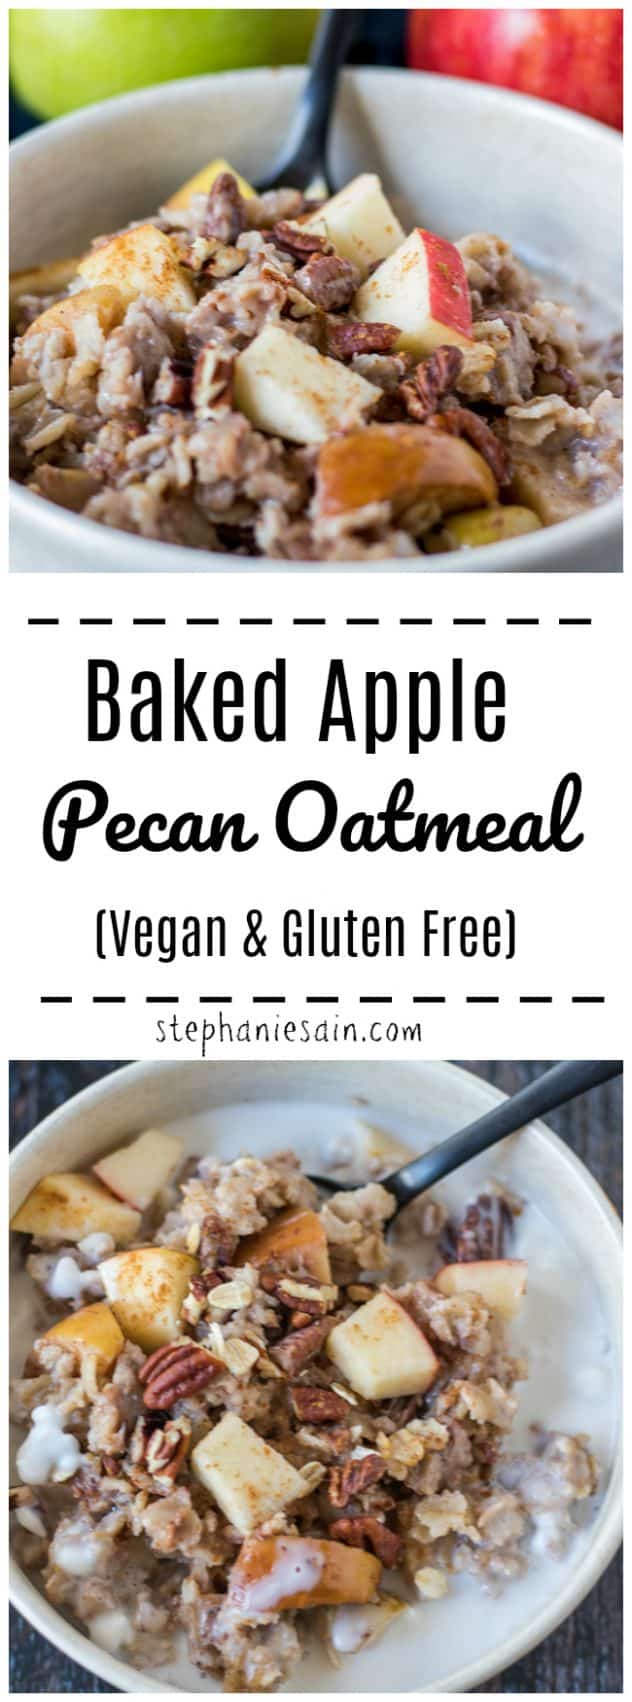 This Baked Apple Pecan Oatmeal is loaded with all the flavors of Fall. Apples, pecans, cinnamon & nutmeg baked in your oatmeal for a delicious breakfast the whole family will love. Also good for serving guests. Vegan & Gluten Free.